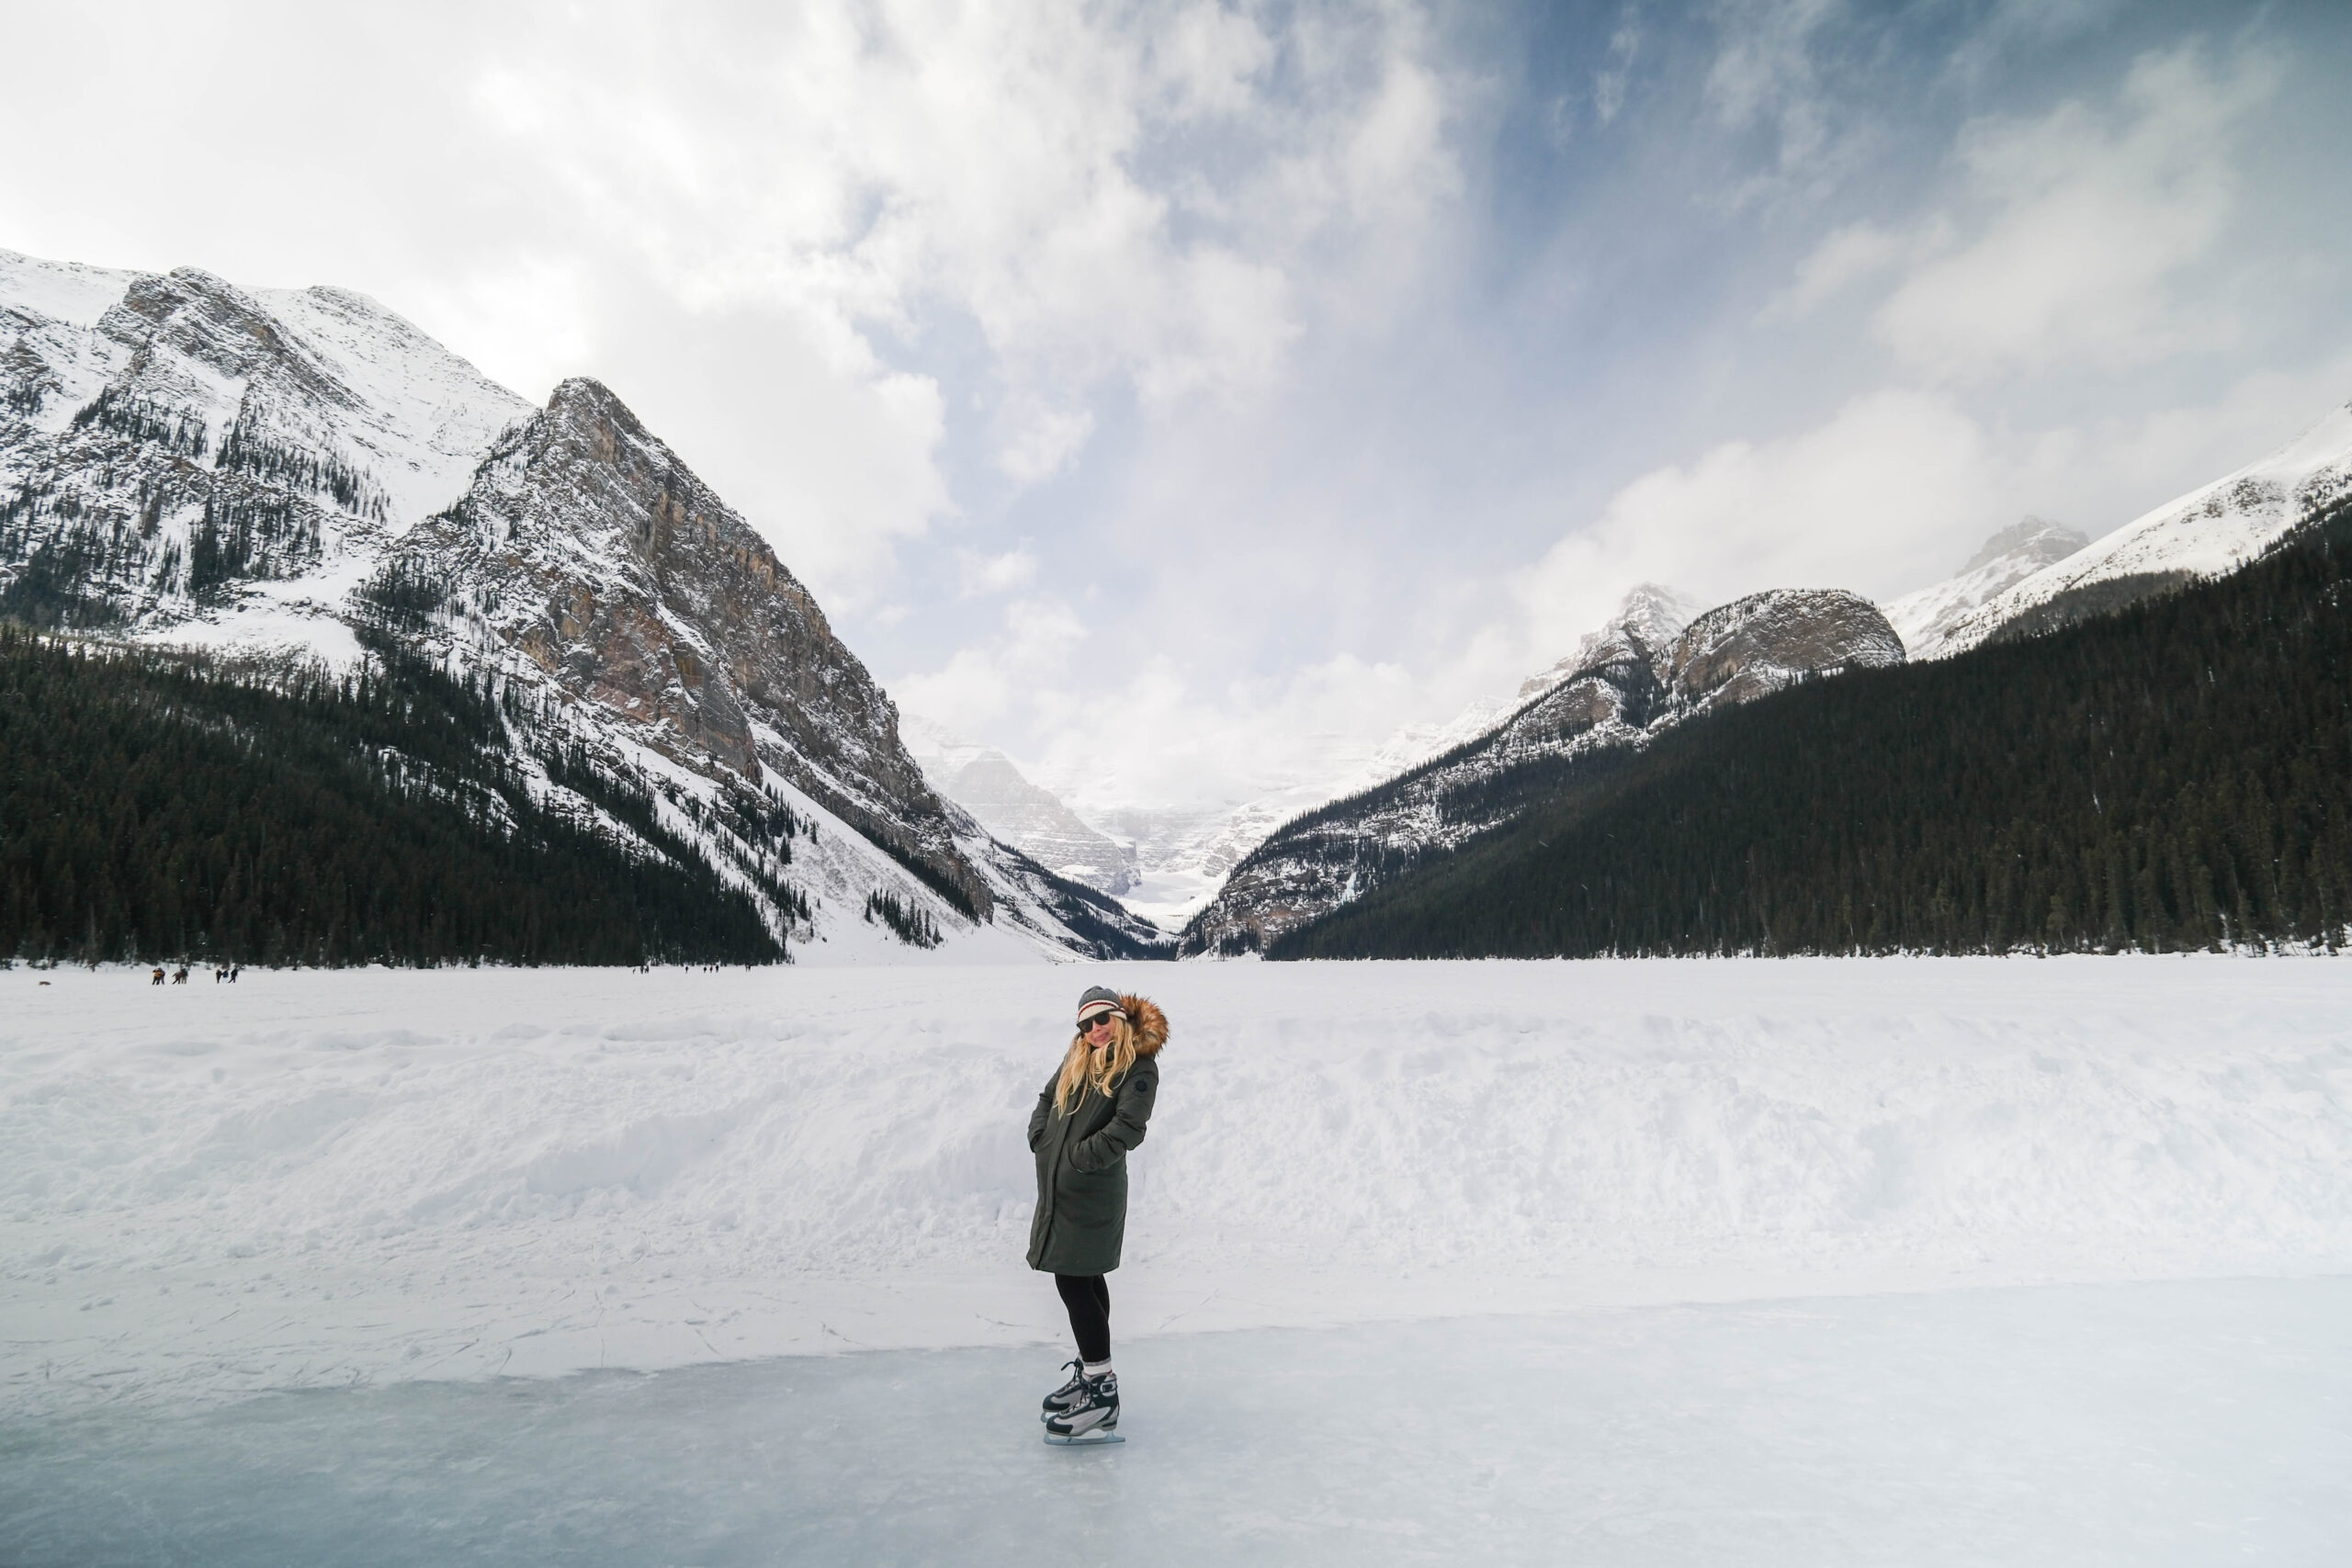 Lake Louise in winter - - small towns in Alberta